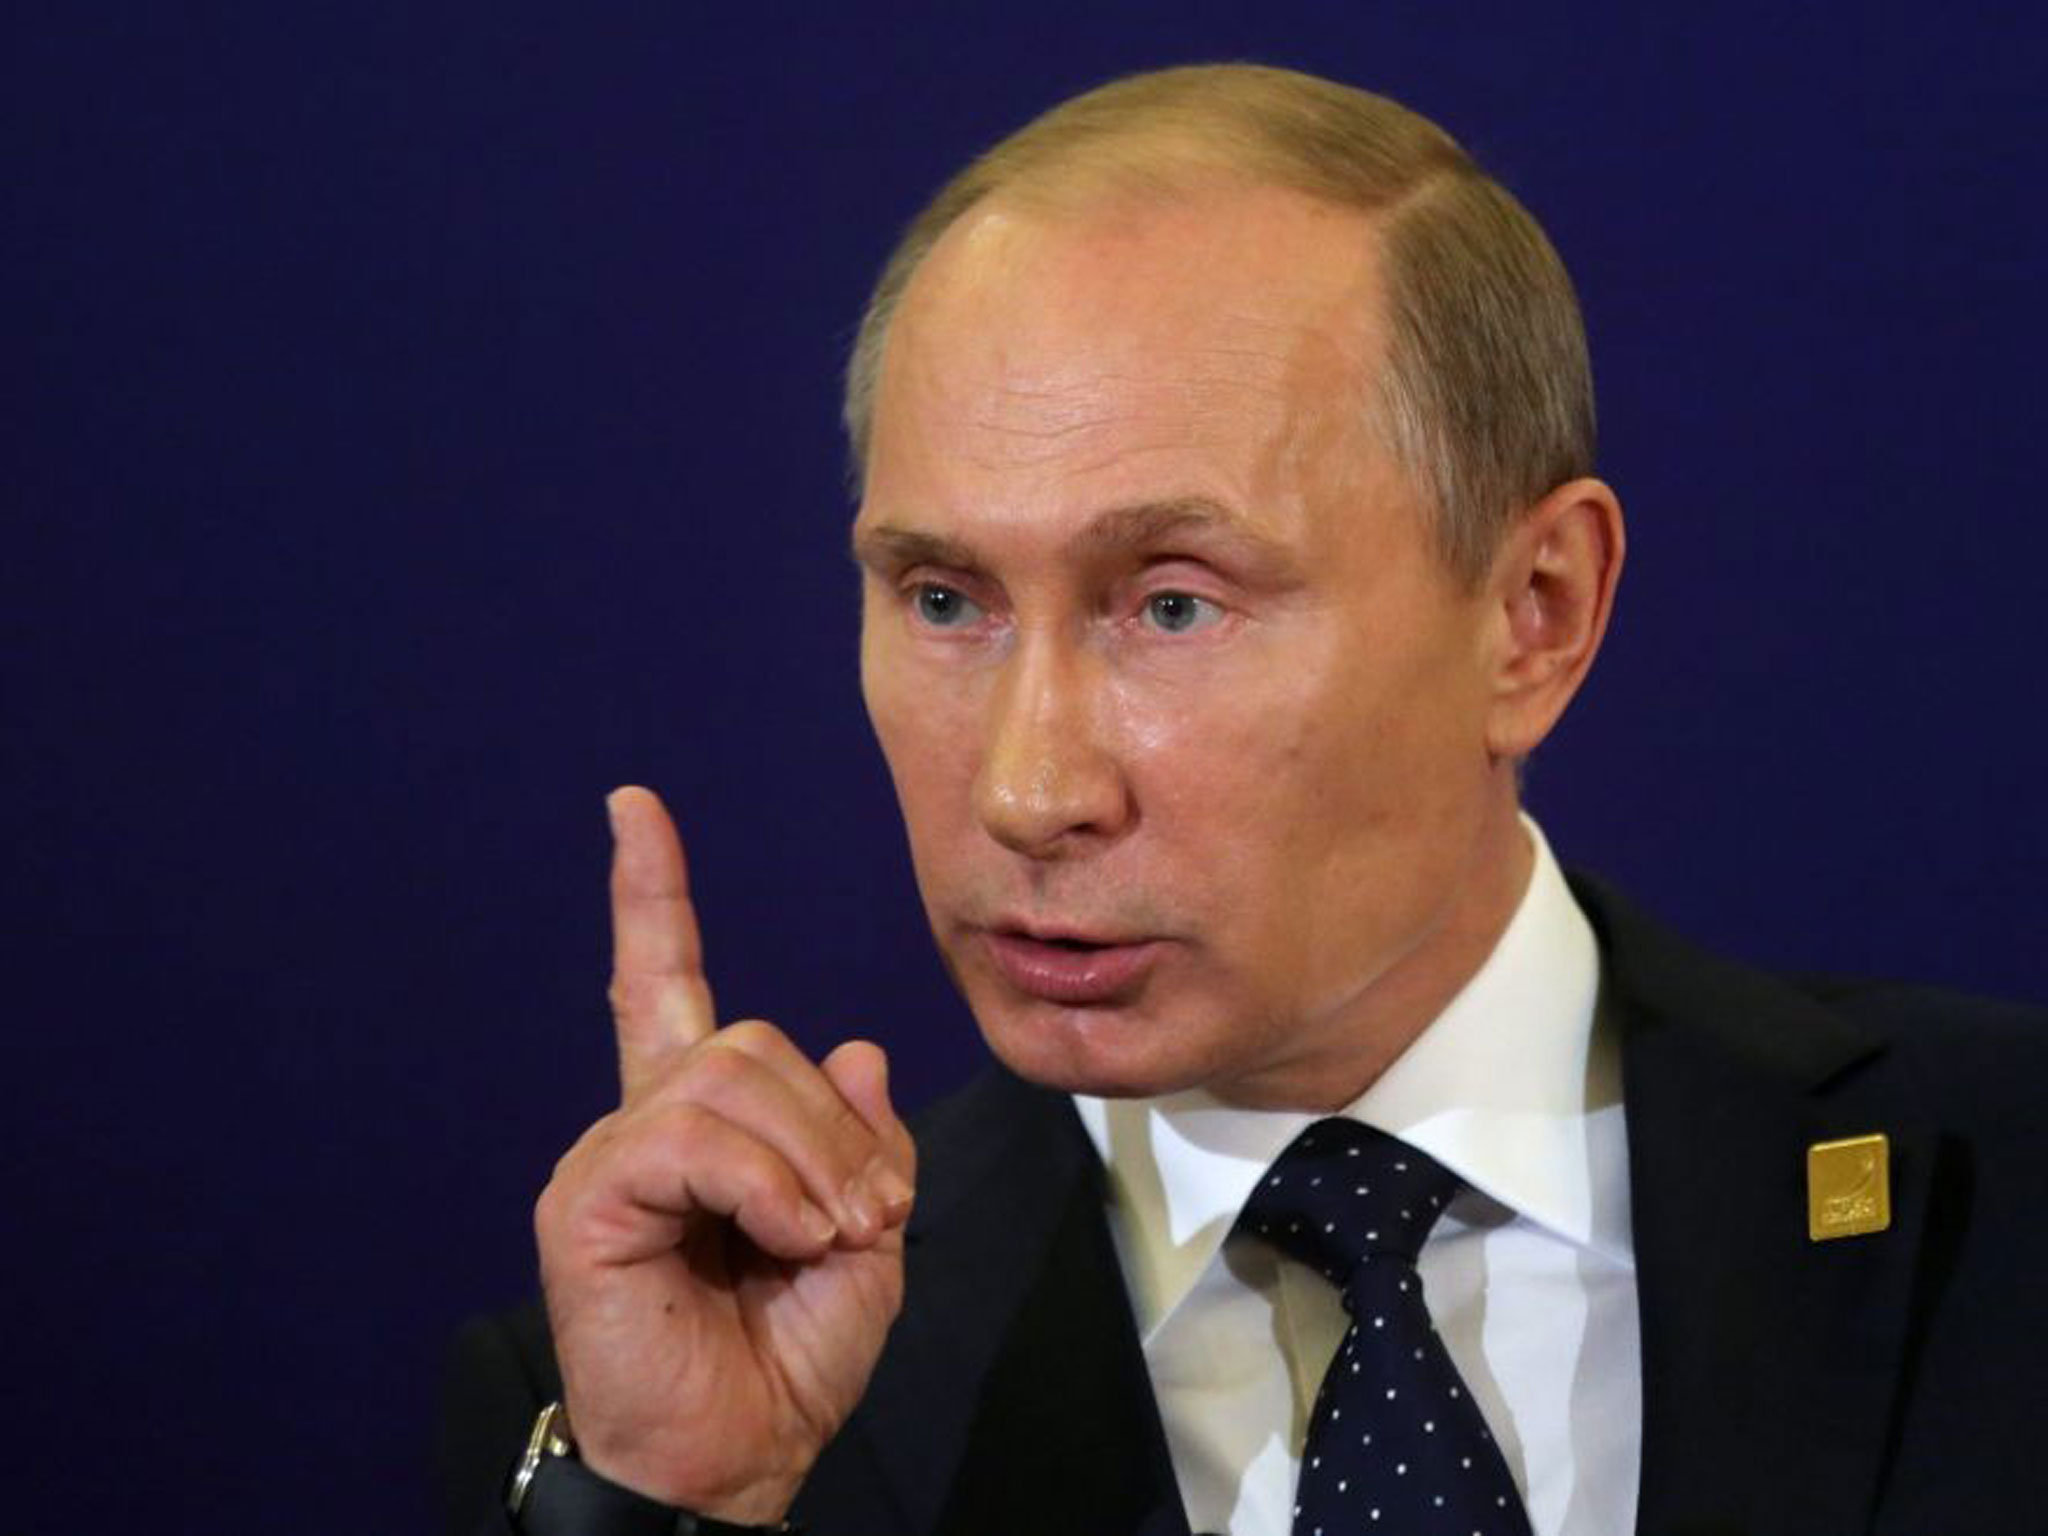 Putin says 'traumatic effect' of Brexit vote to last long